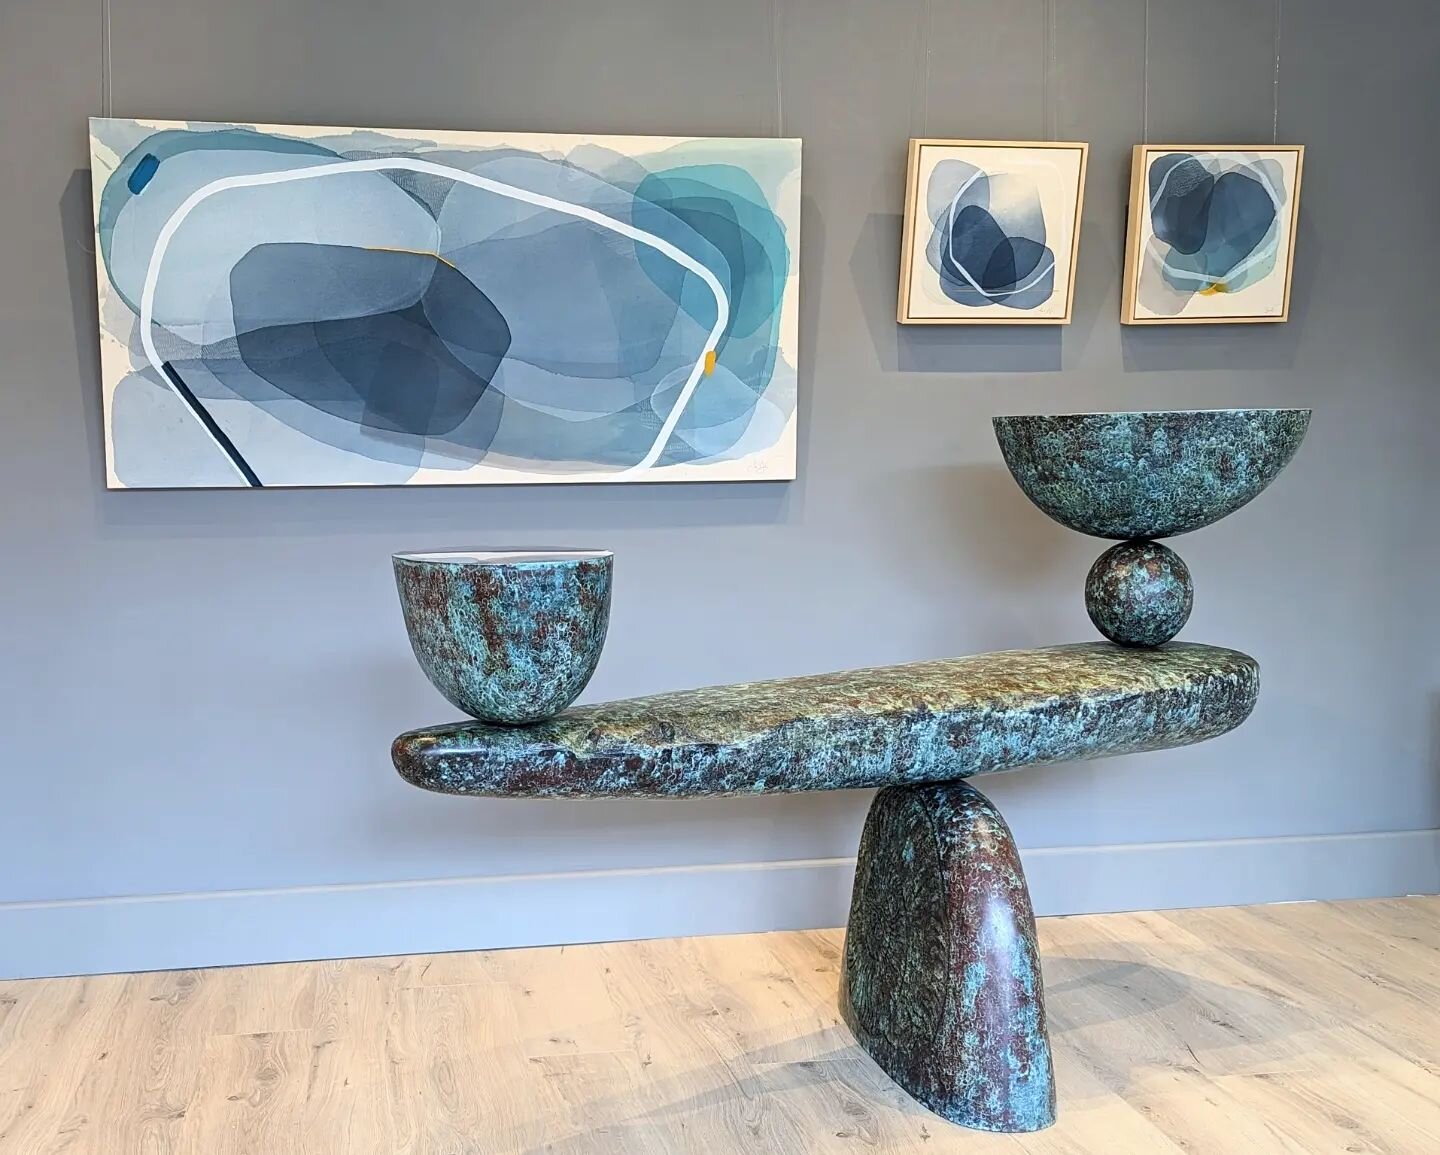 New in the gallery ✨ We are so excited to have these beautiful pieces by Jane Hunter gracing our gallery walls! @janehunterart 

Jane's wonderful mixed media pieces are inspired by landscape, nature and place and explore the symbiotic relationship we